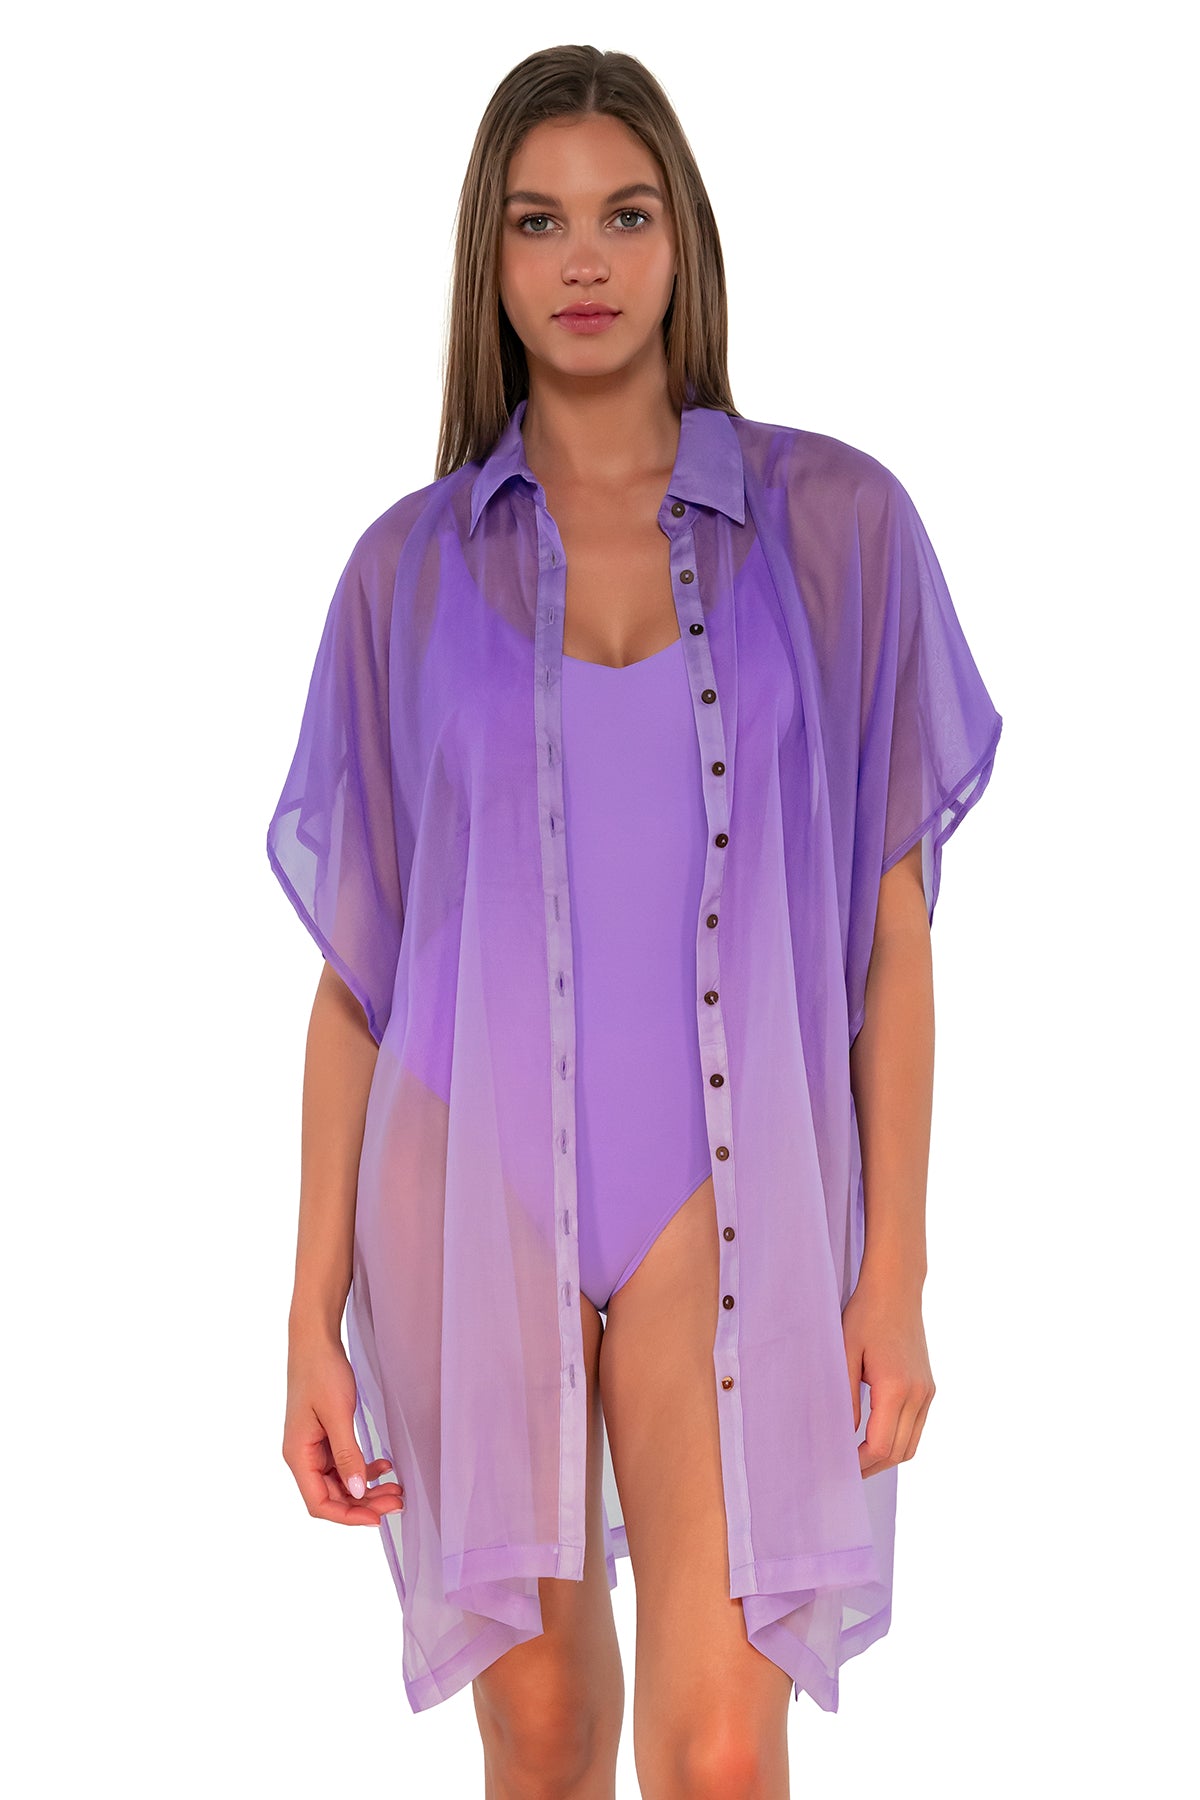 Front view of Sunsets Passion Flower Shore Thing Tunic worn as an open shirt